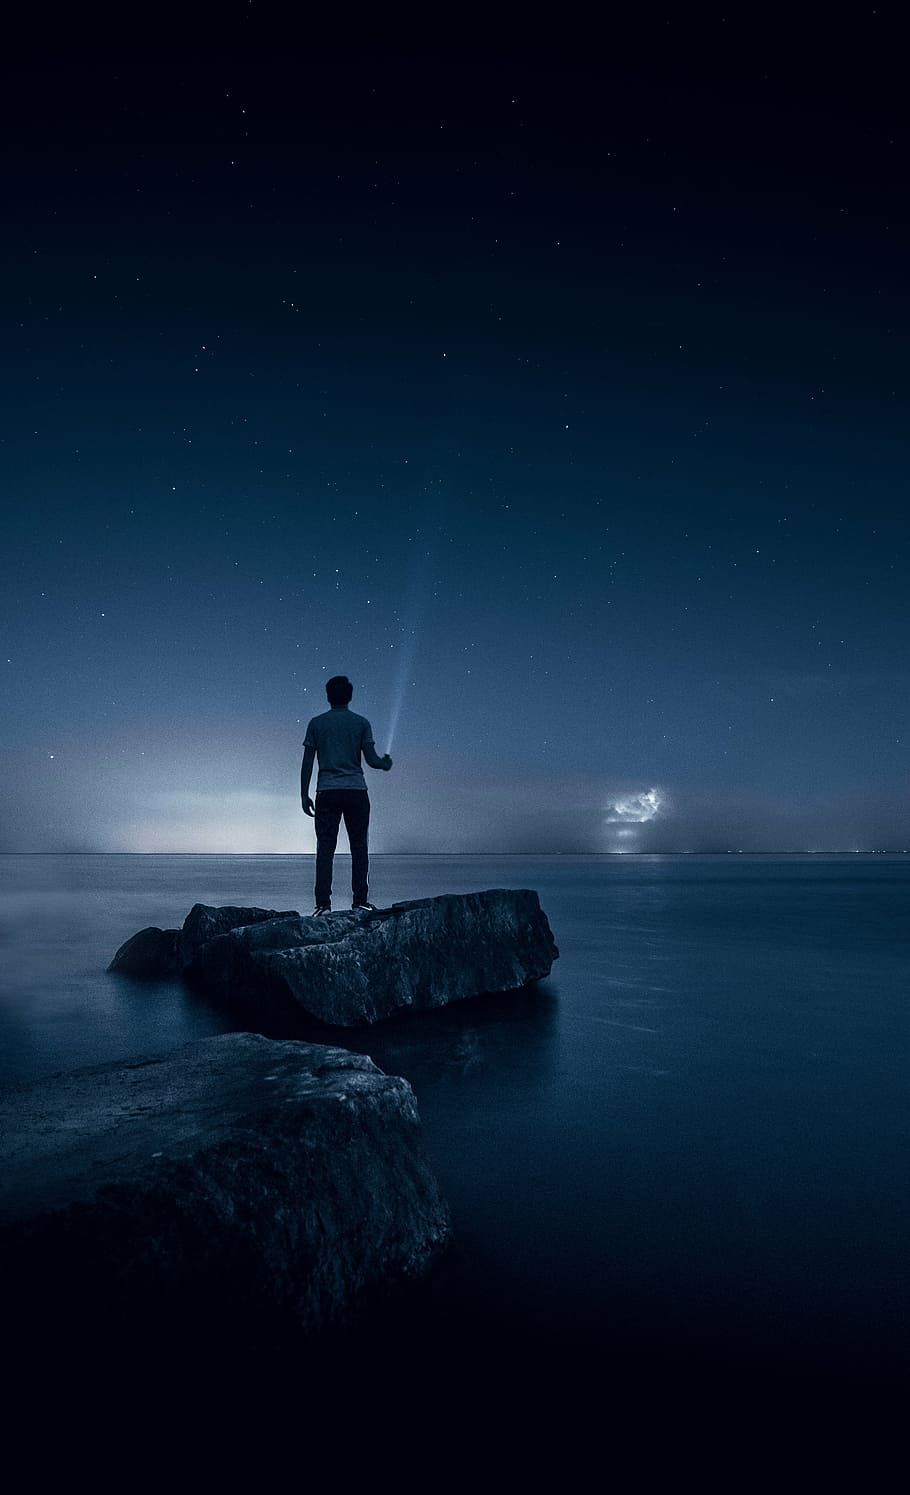 man standing on rock surrounded by water holding a flashlight pointing at the sky